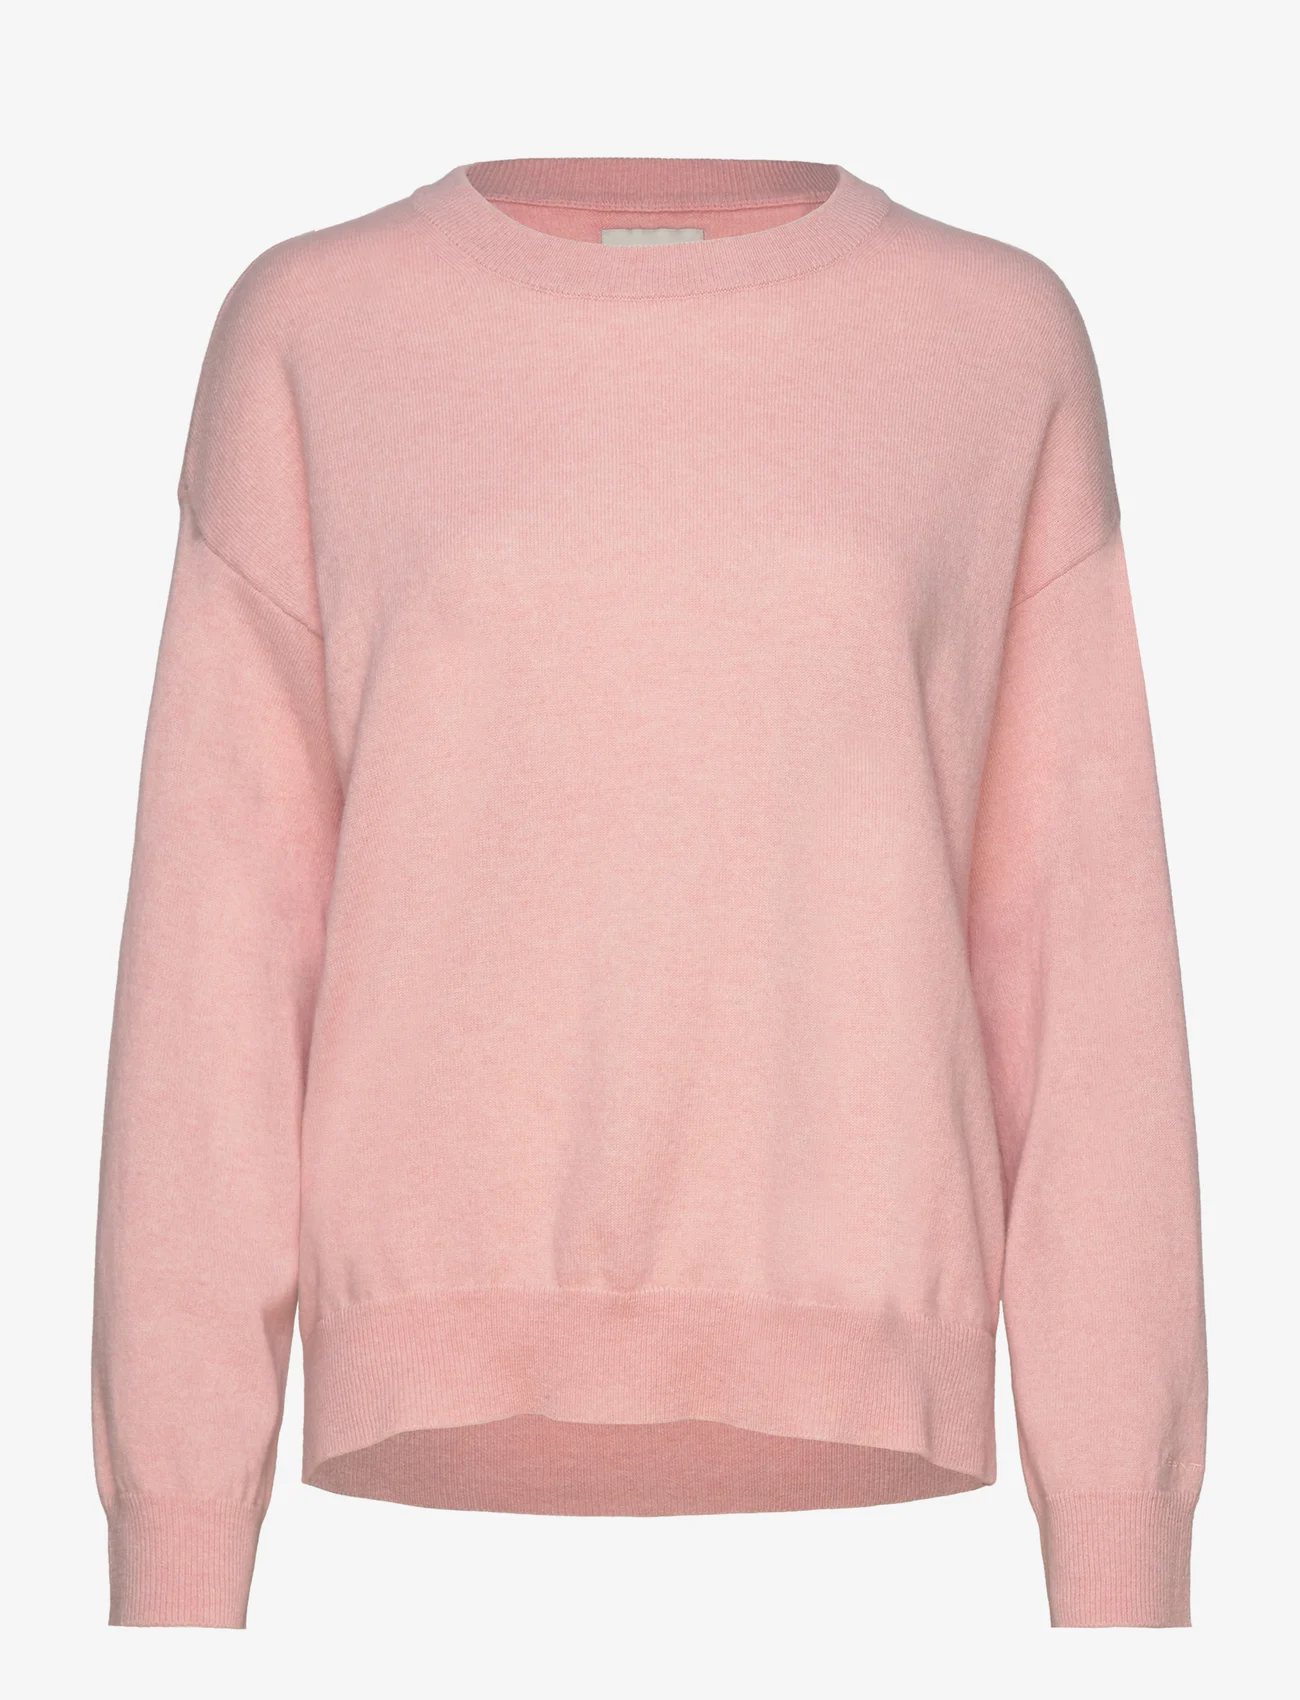 GANT - D1. SUPERFINE LAMBSWOOL C-NECK - pullover - faded pink - 0